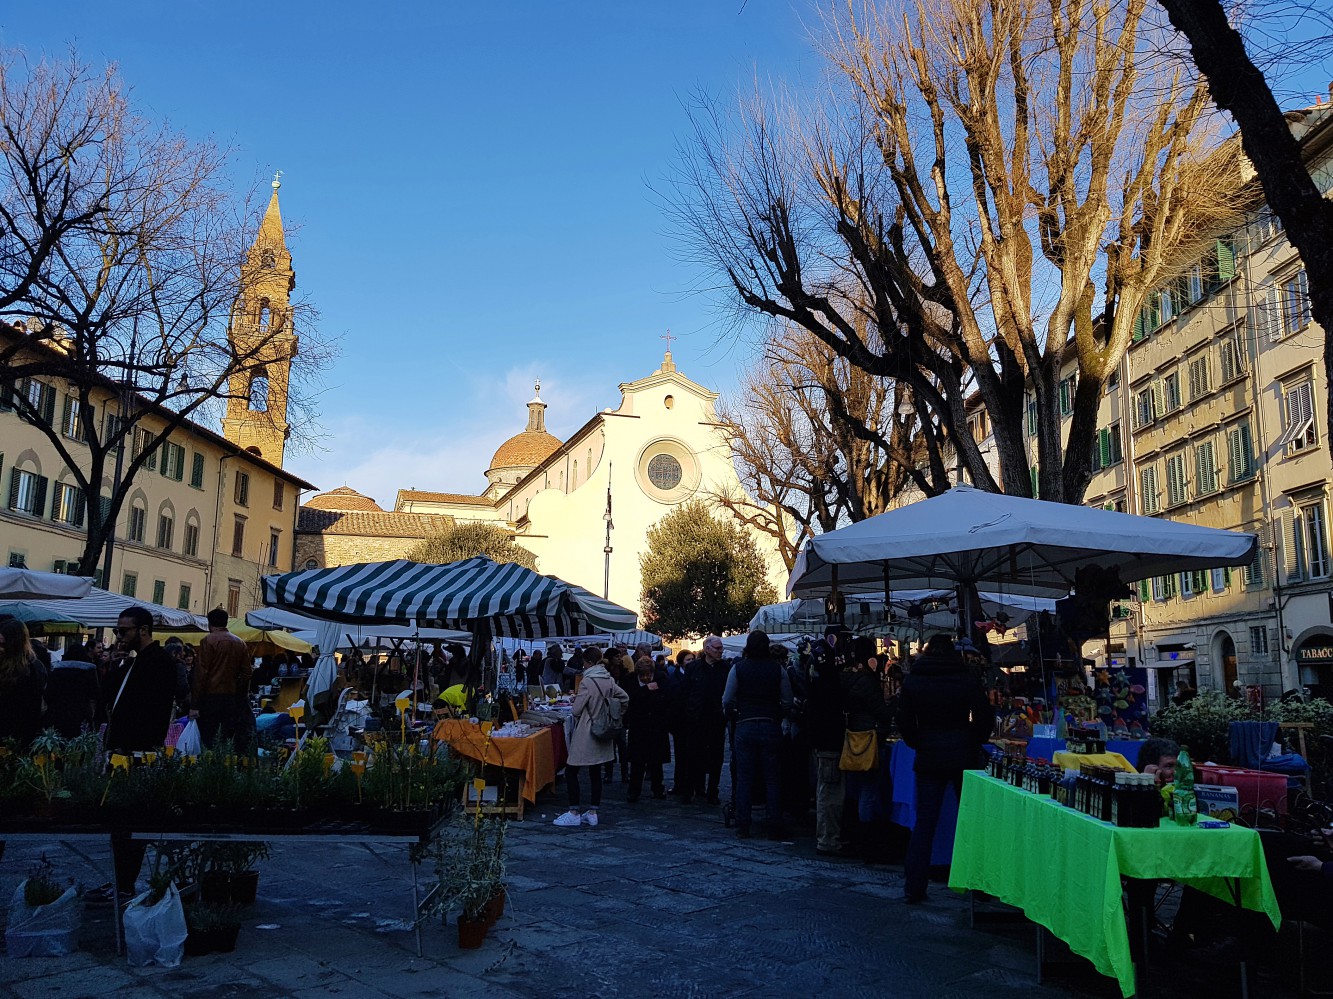 Markets and Wine Vendors